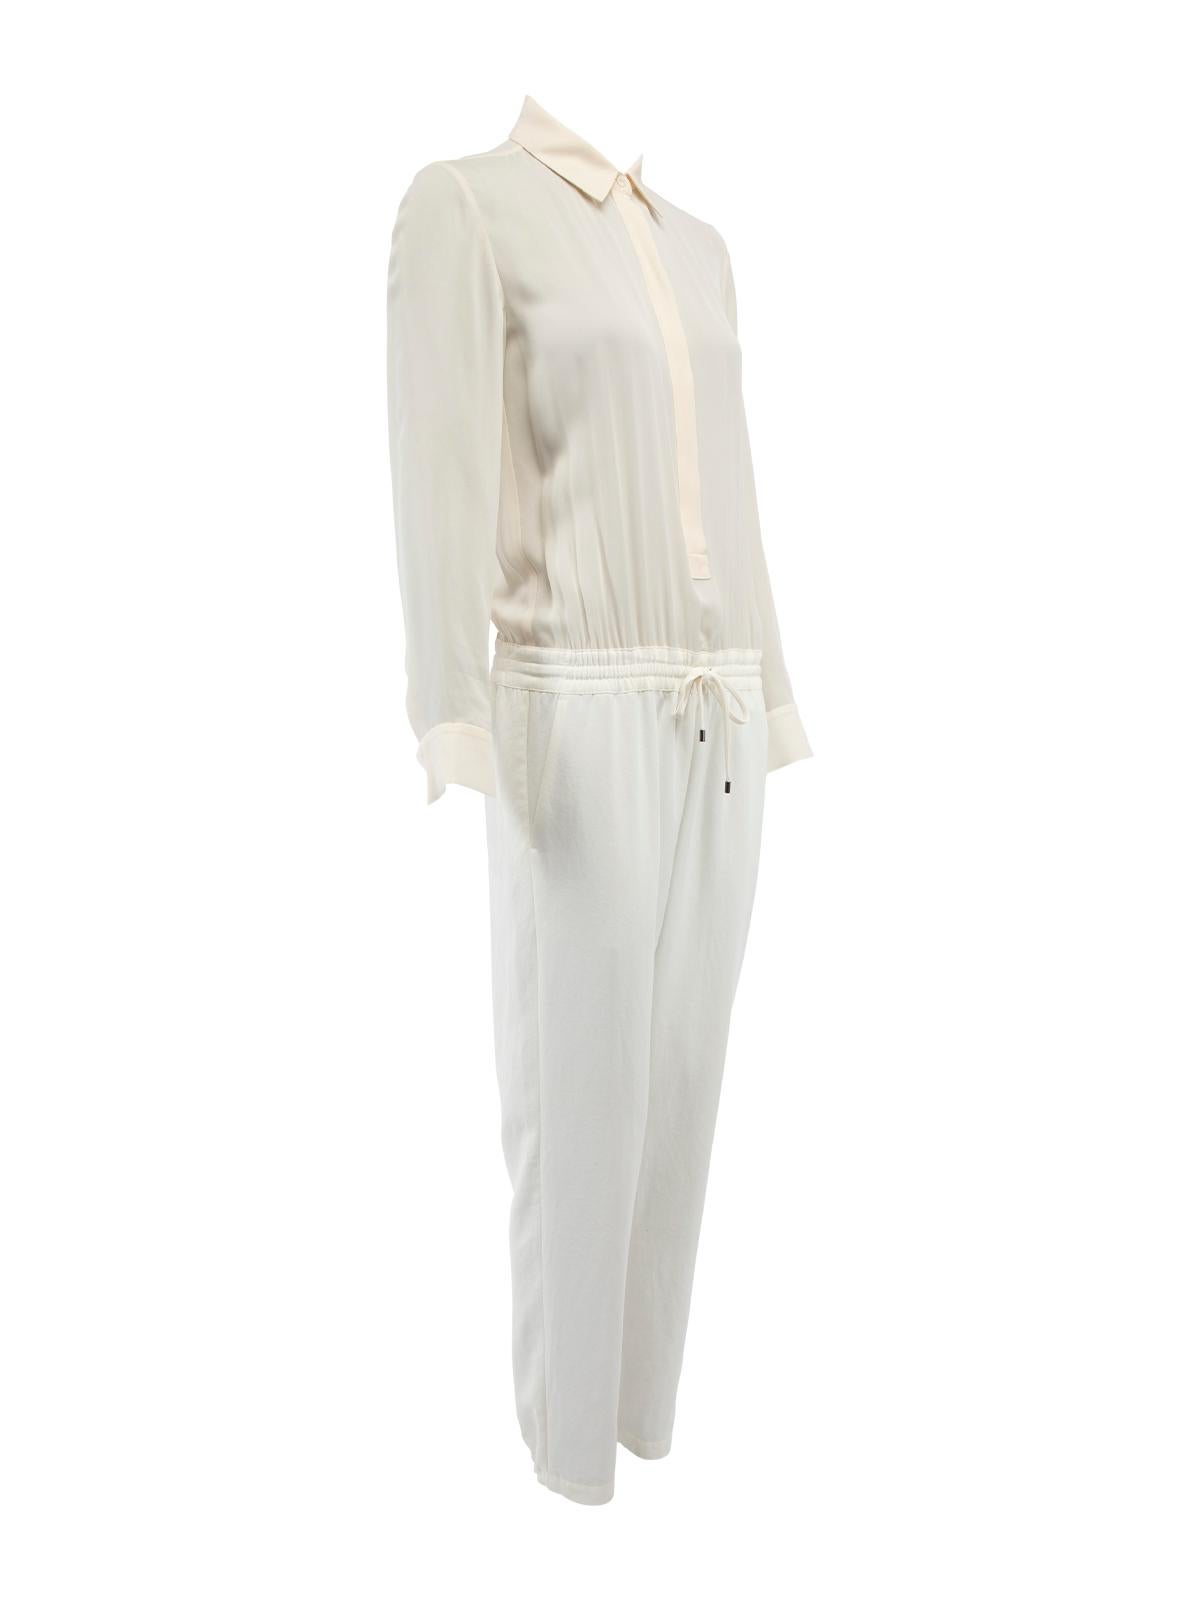 CONDITION is Very good. Minimal wear to jumpsuit is evident. Minimal marks seen to the trouser turn-ups on this used Vince designer resale item. Details Cream Silk Jumpsuit Long sleeves Collared Button up top Buttoned turn-ups Elasticated on